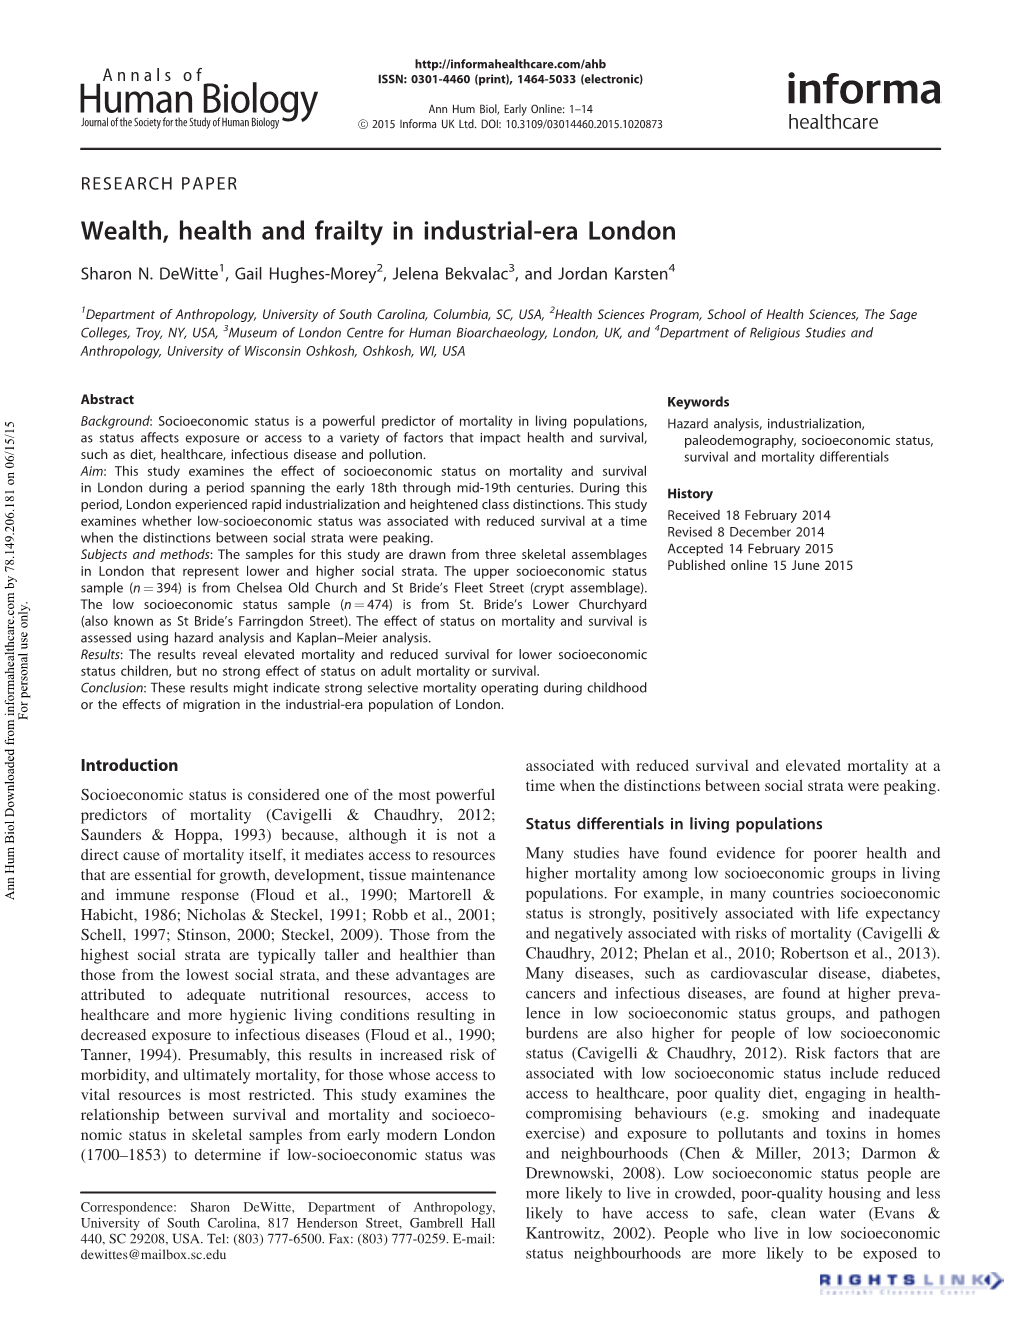 Wealth, Health and Frailty in Industrial-Era London